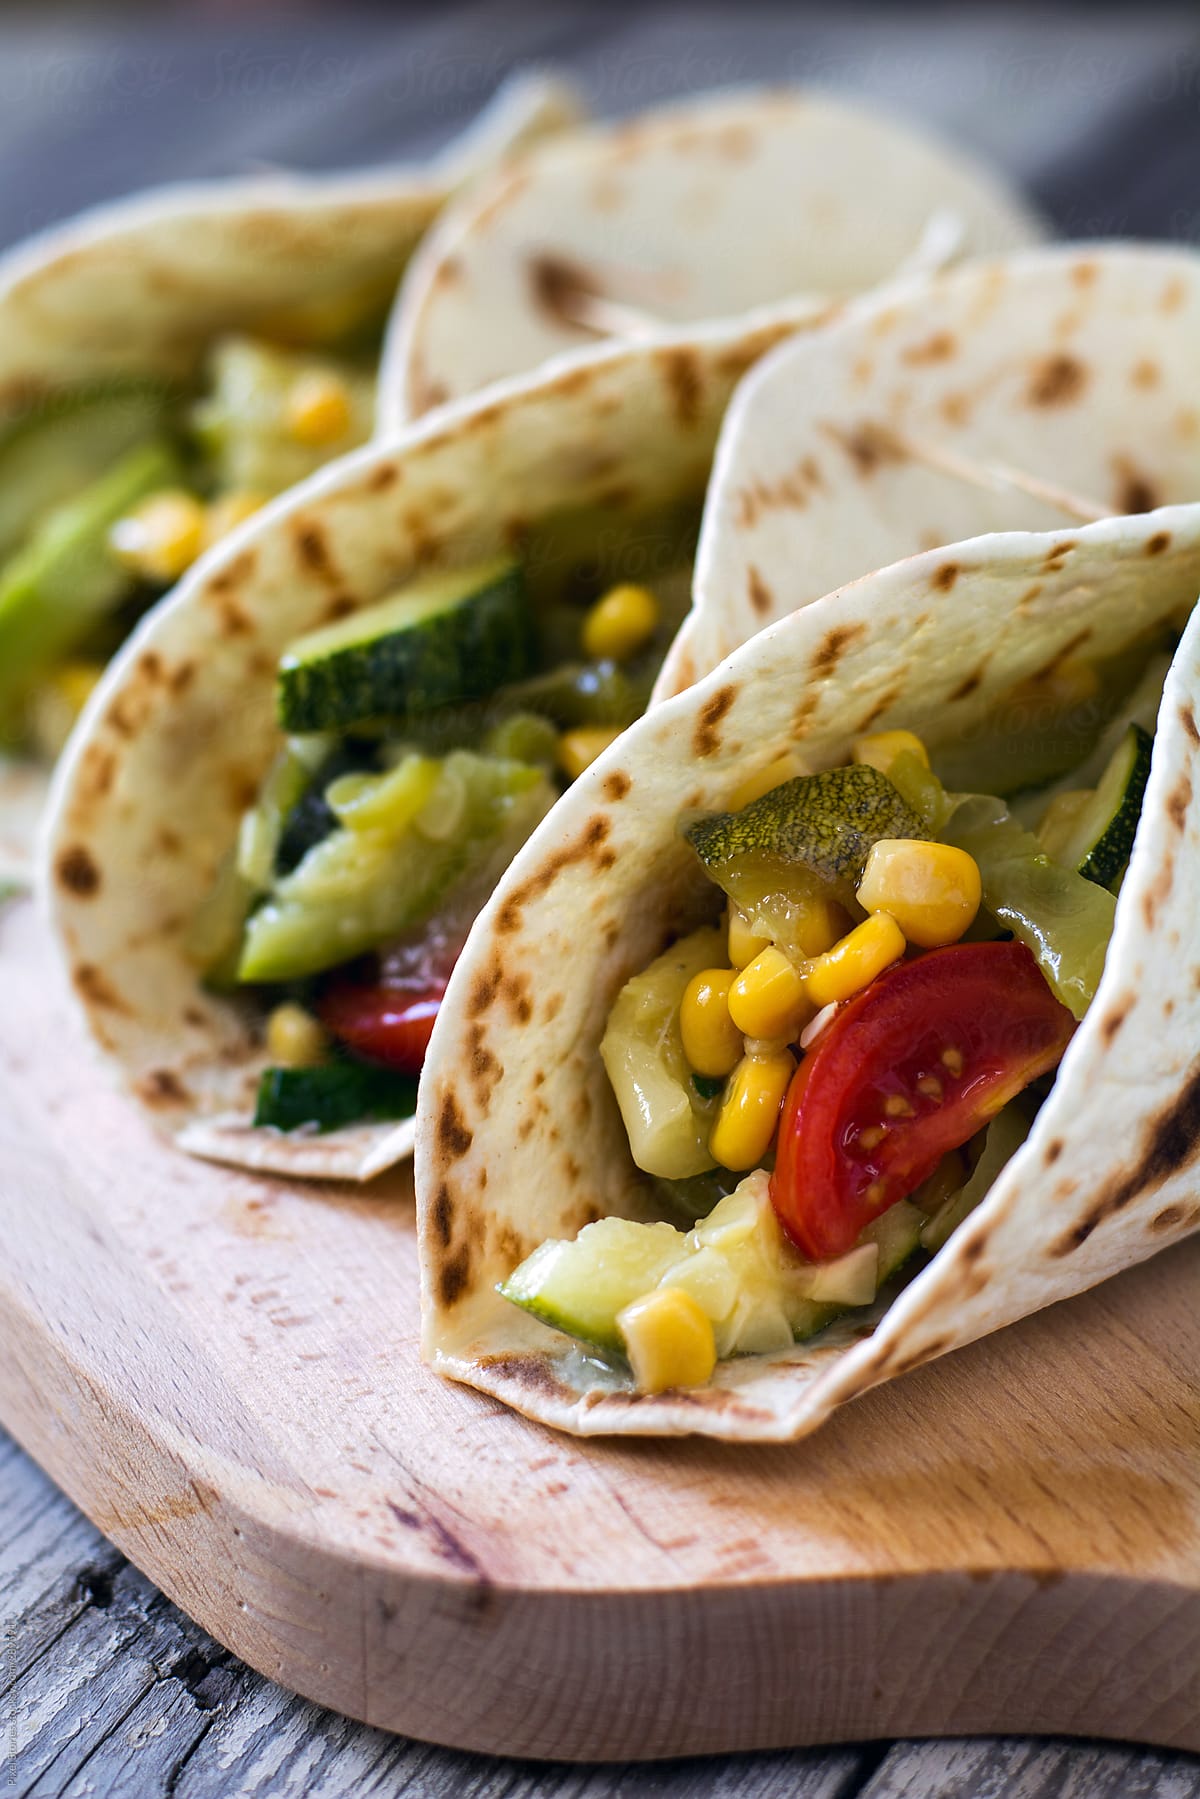 Vegetable tacos